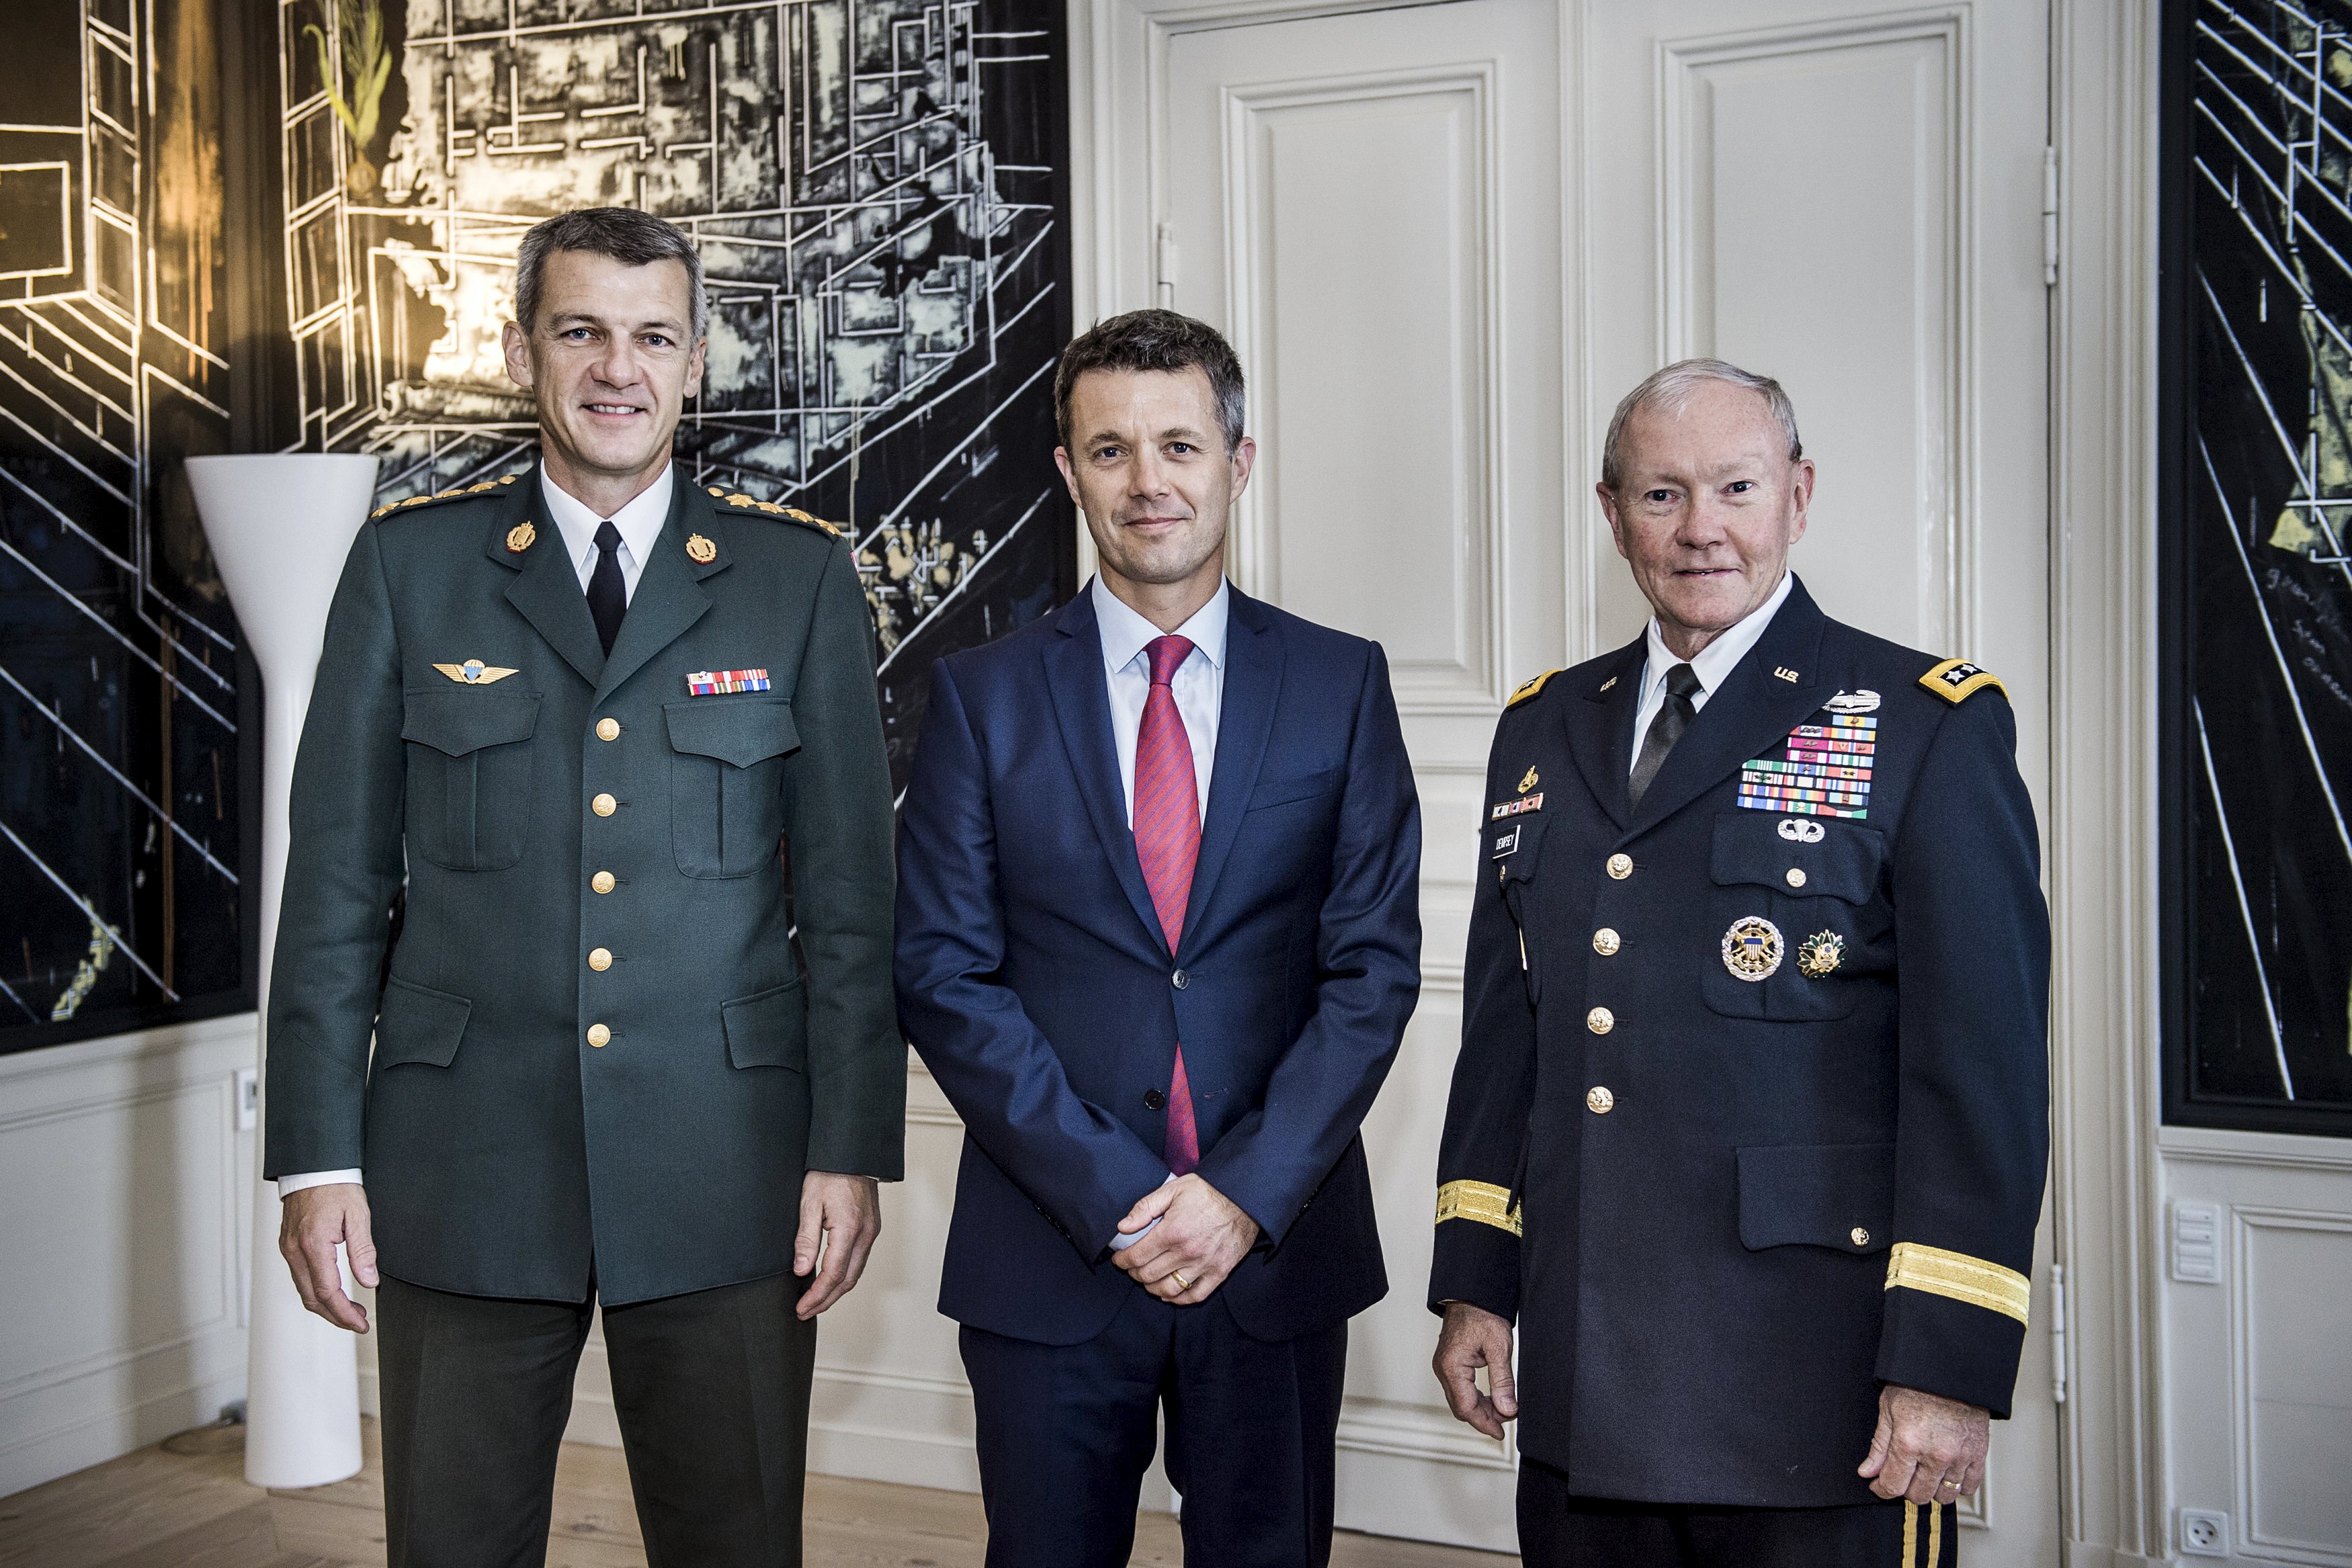 Crown Prince Frederik of Denmark meets Chairman of the Joint Chiefs of Staff, US Army General Martin Dempsey (right) and Danish Chief of Defence General Peter Bartram in the Crown Prince's meeting room at Amalienborg Castle, in Copenhagen August 18, 2015. Photo: Reuters